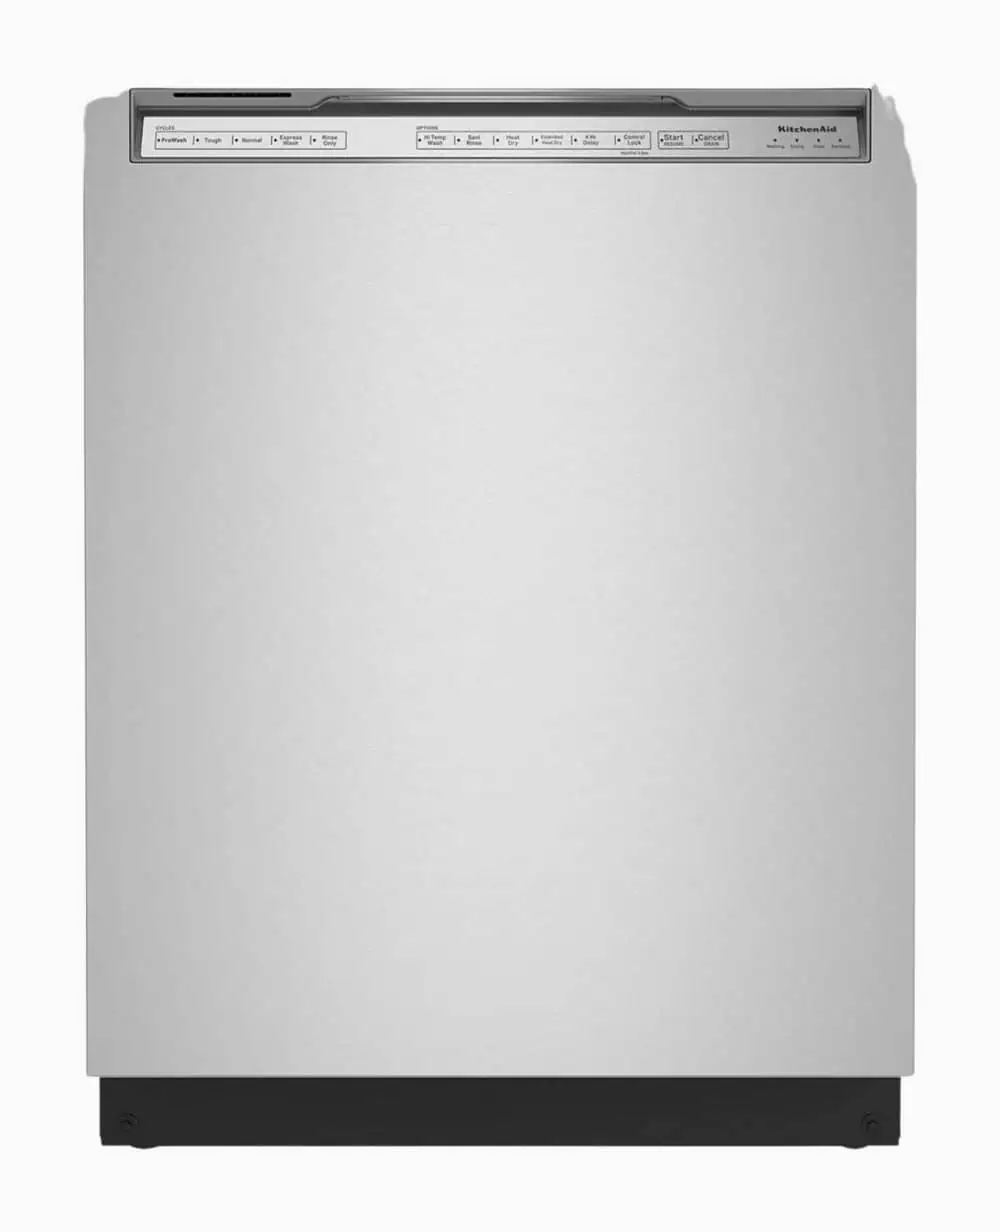 Product Image of the KitchenAid 24-Inch Stainless Steel Dishwasher